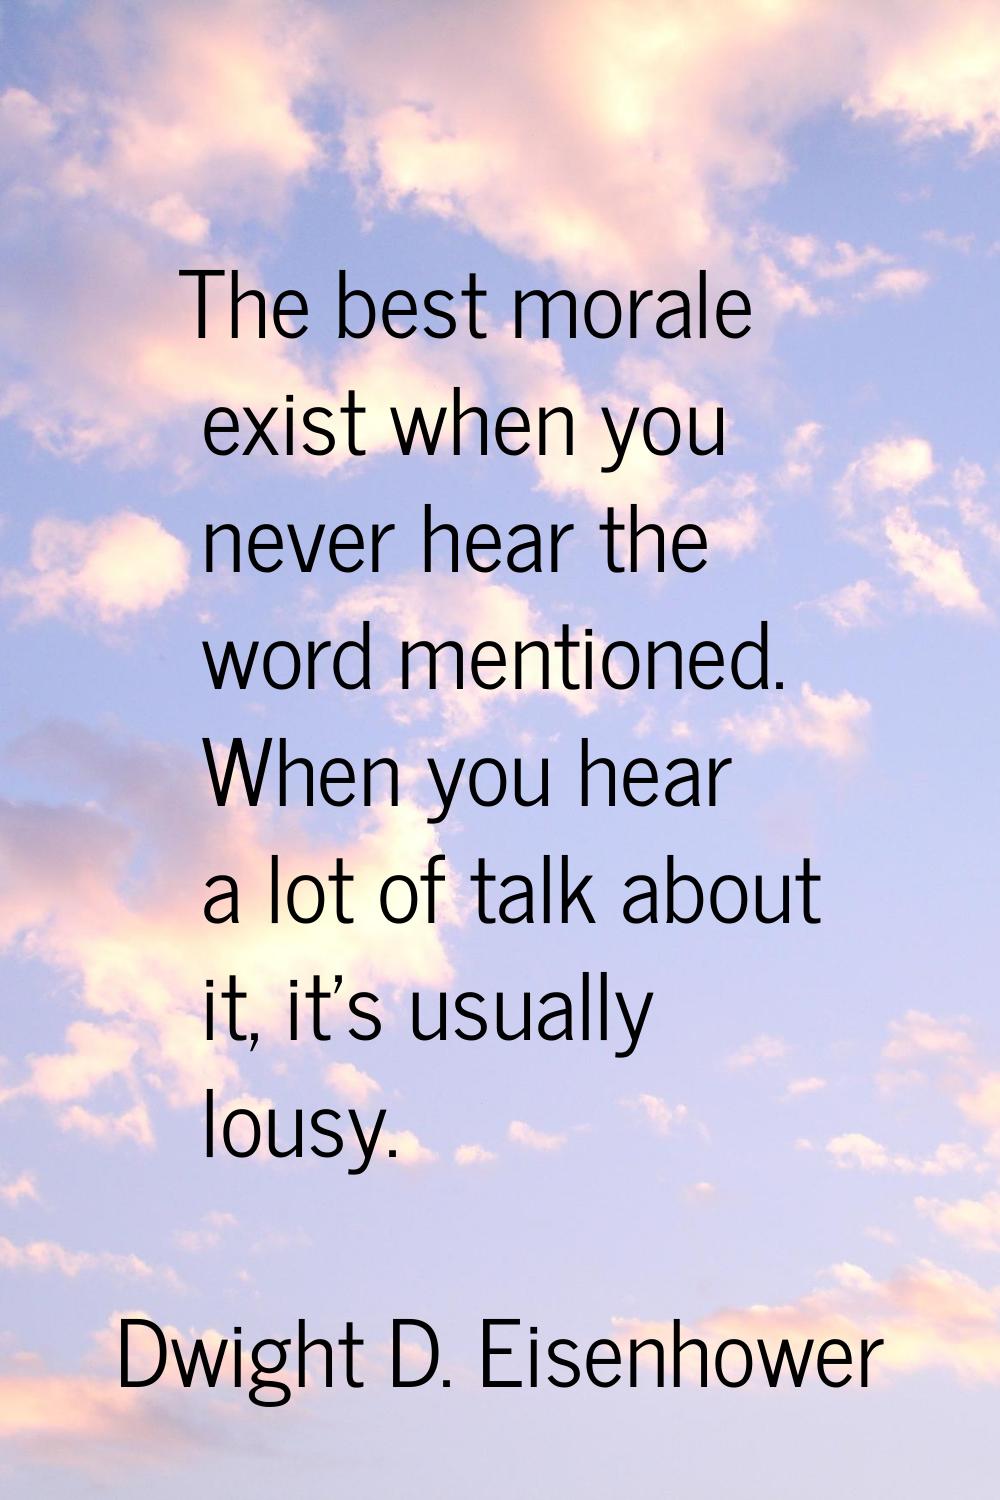 The best morale exist when you never hear the word mentioned. When you hear a lot of talk about it,